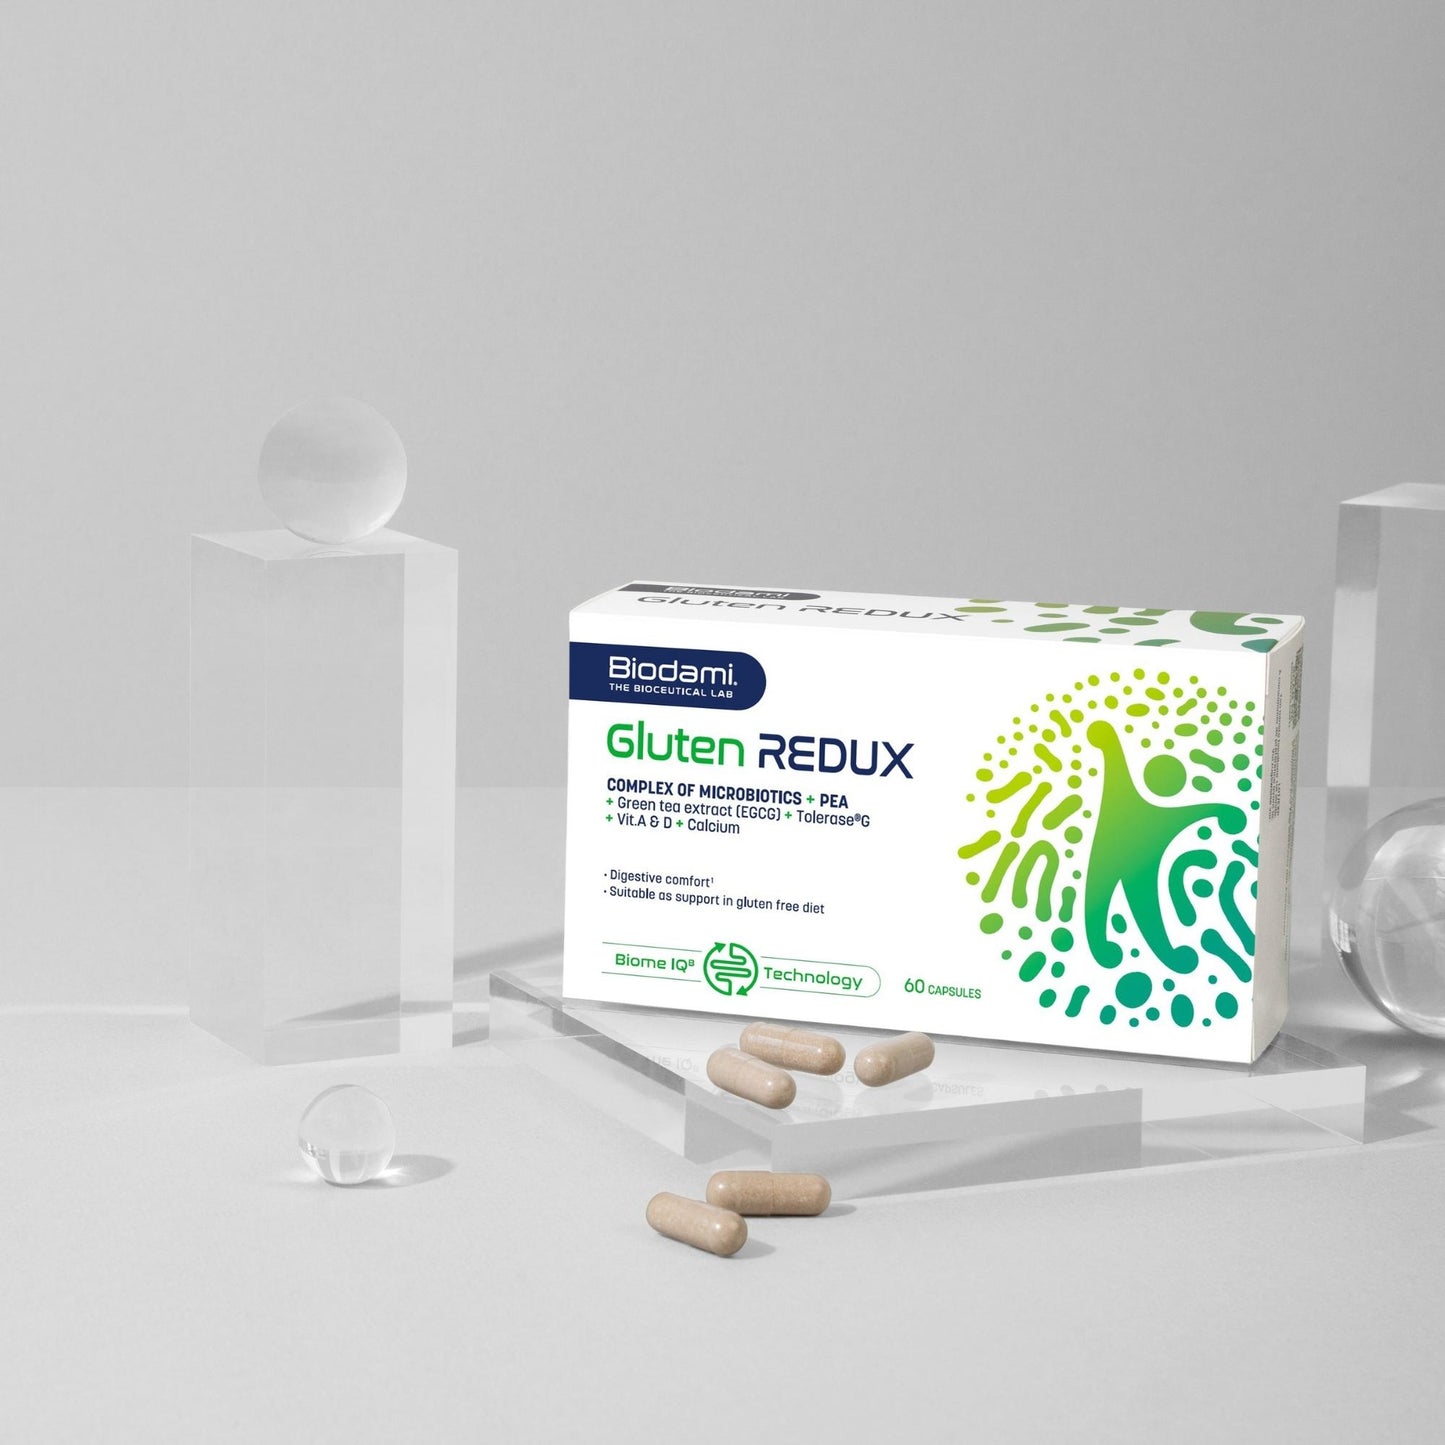 Pack shot of Gluten Redux. Complex of probiotics, PEA, green tea extract, gluten enzyme Tolerase G, vitamin A and D. For digestive support and gluten intolerance